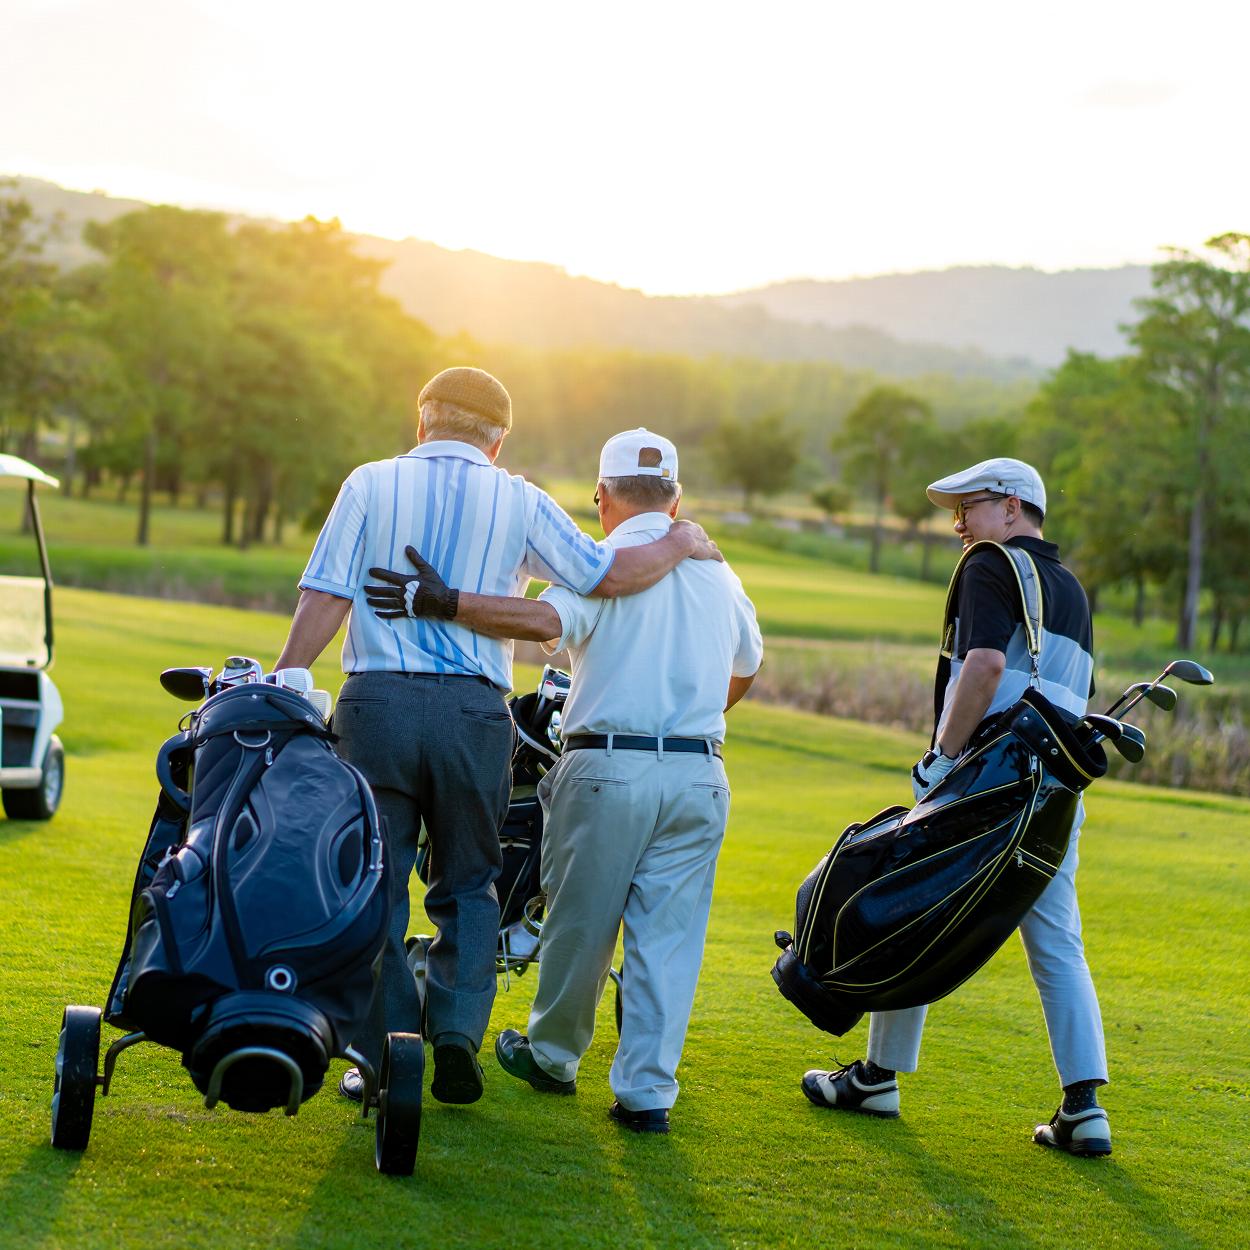 Two senior men and young man walking on golf course